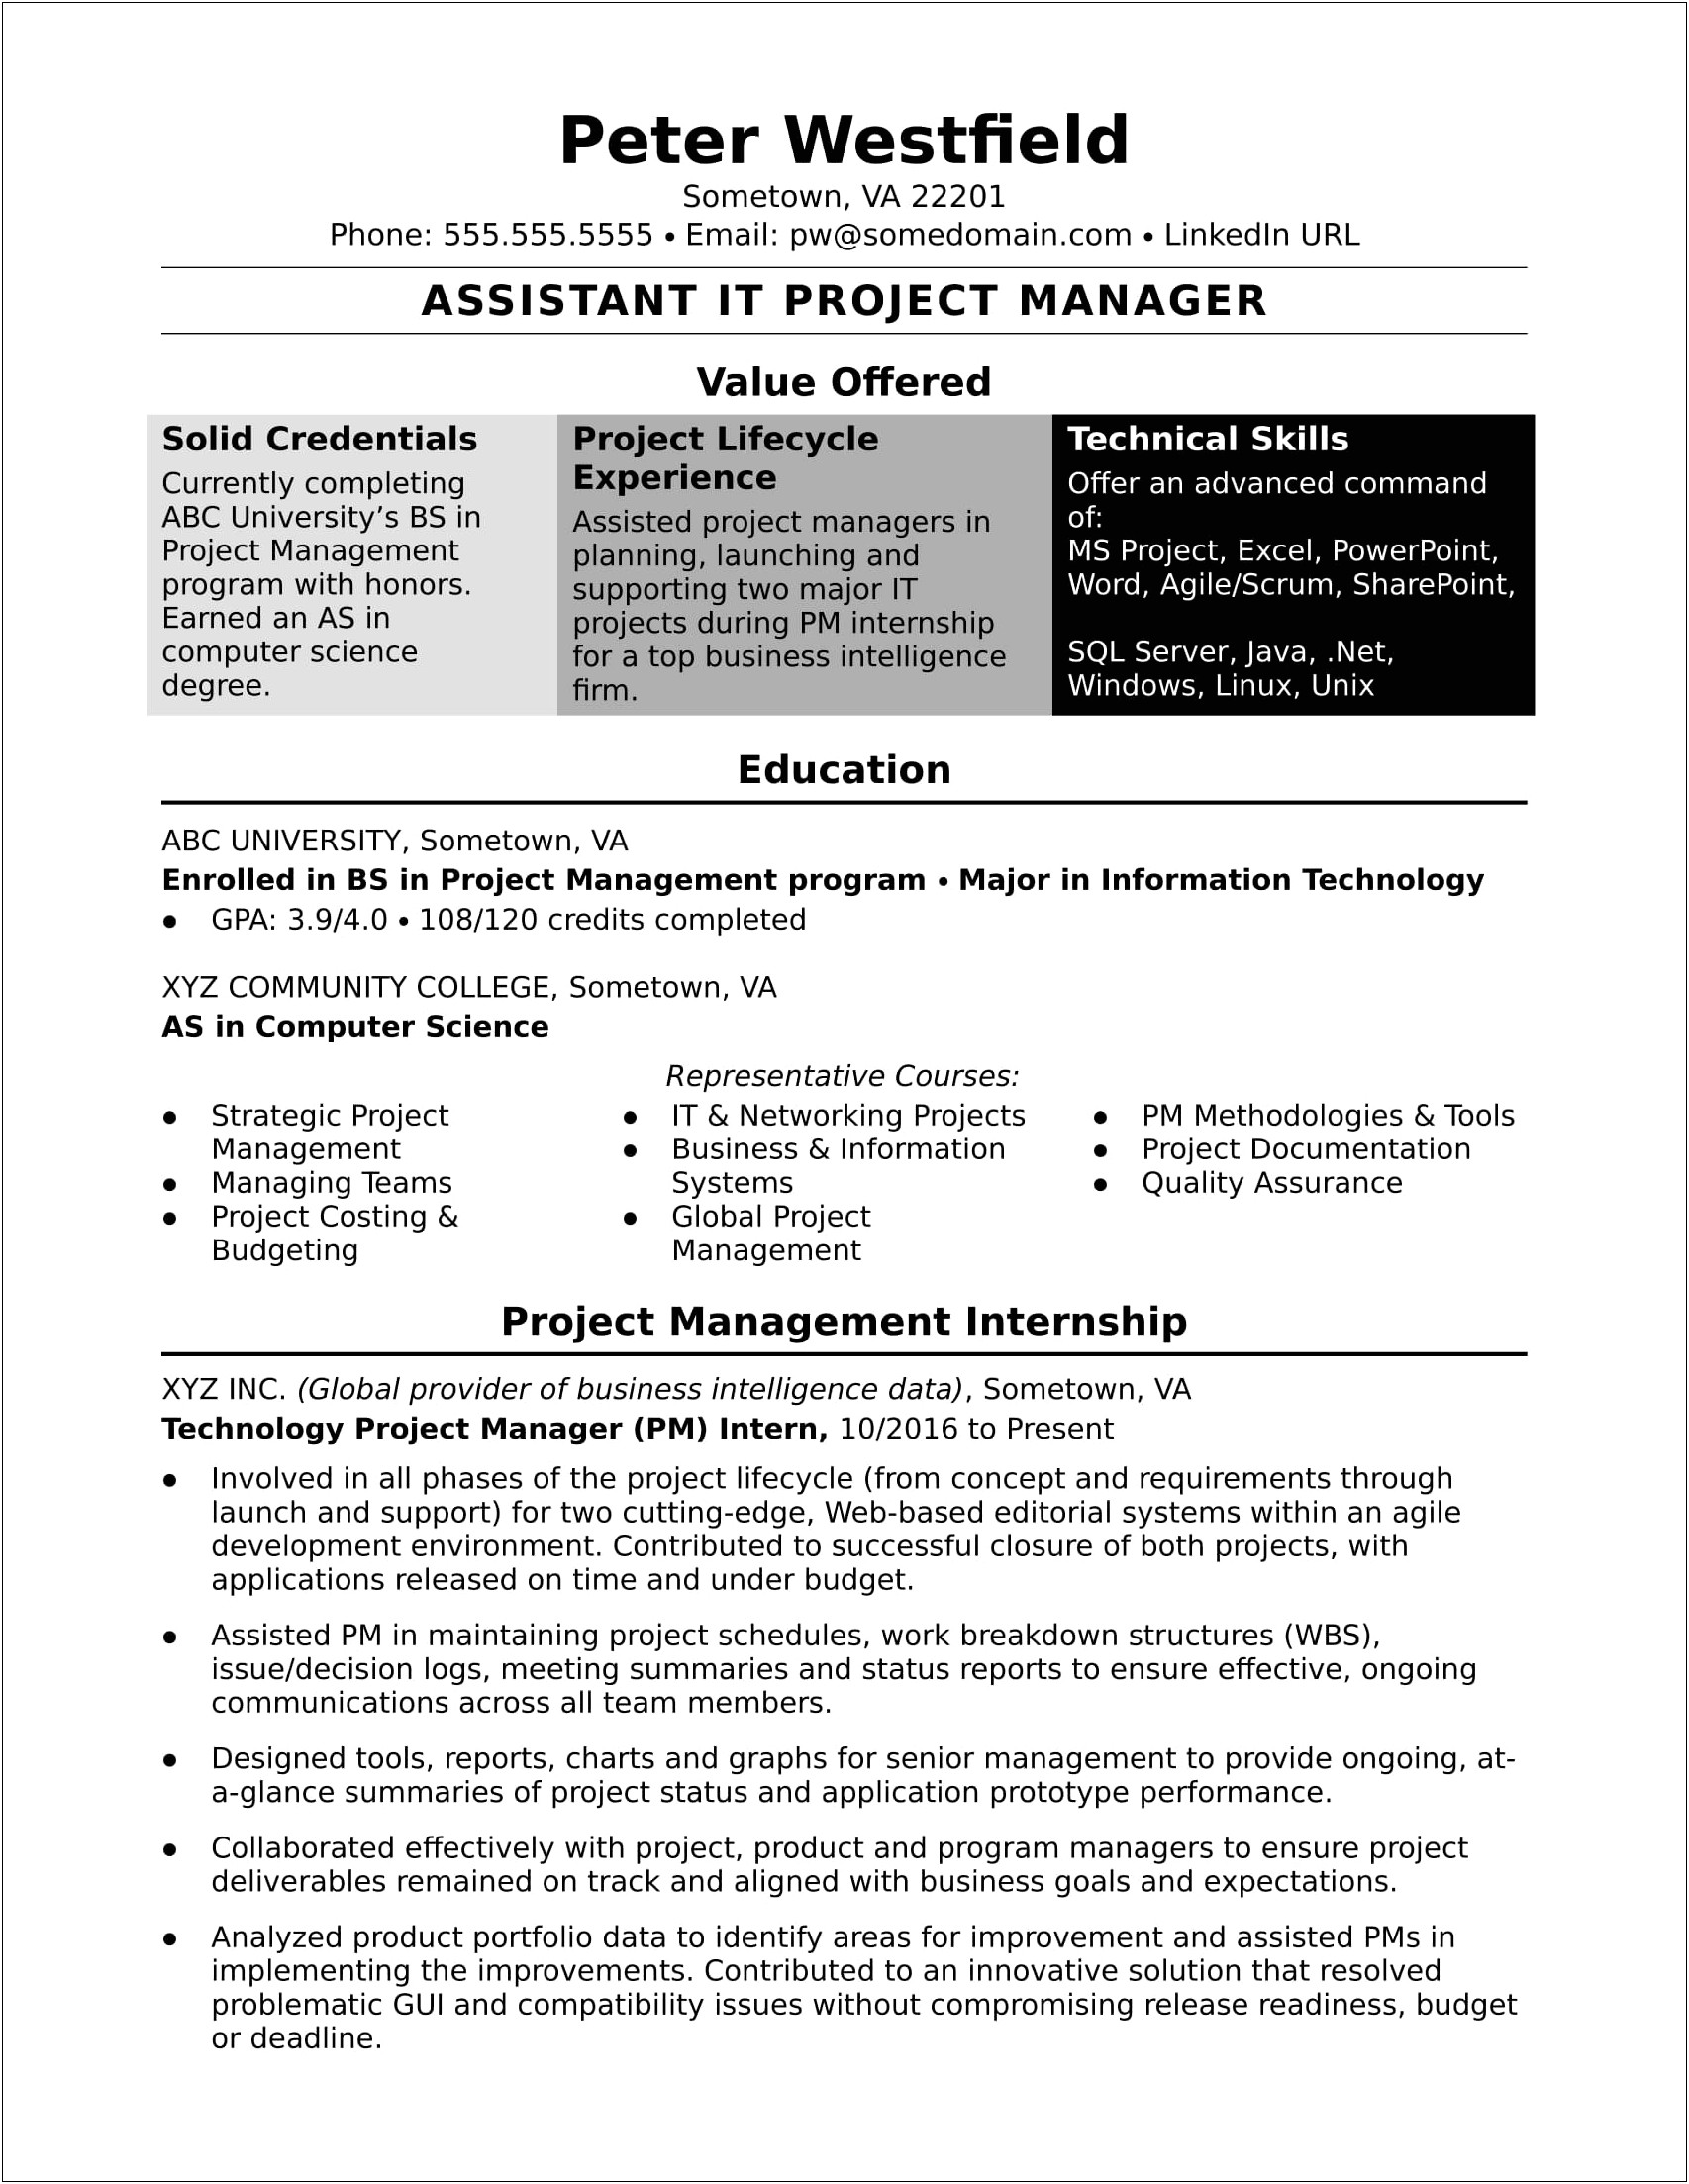 Assistant Project Manager Resume Examples